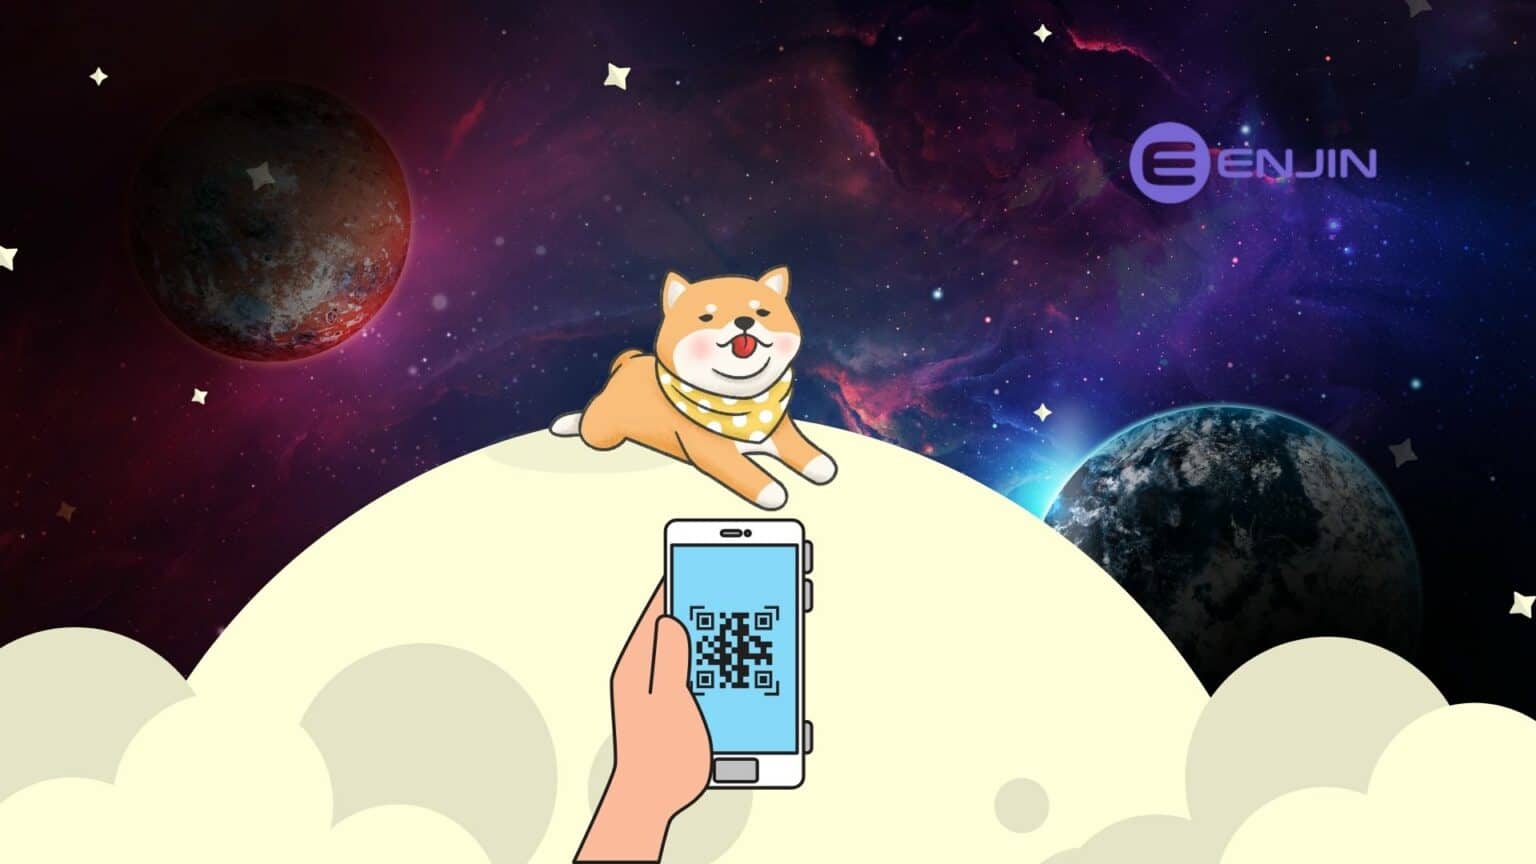 Enjin Airdrops 50,000 Tokens to Demonstrate Beam QR Marketing Tool